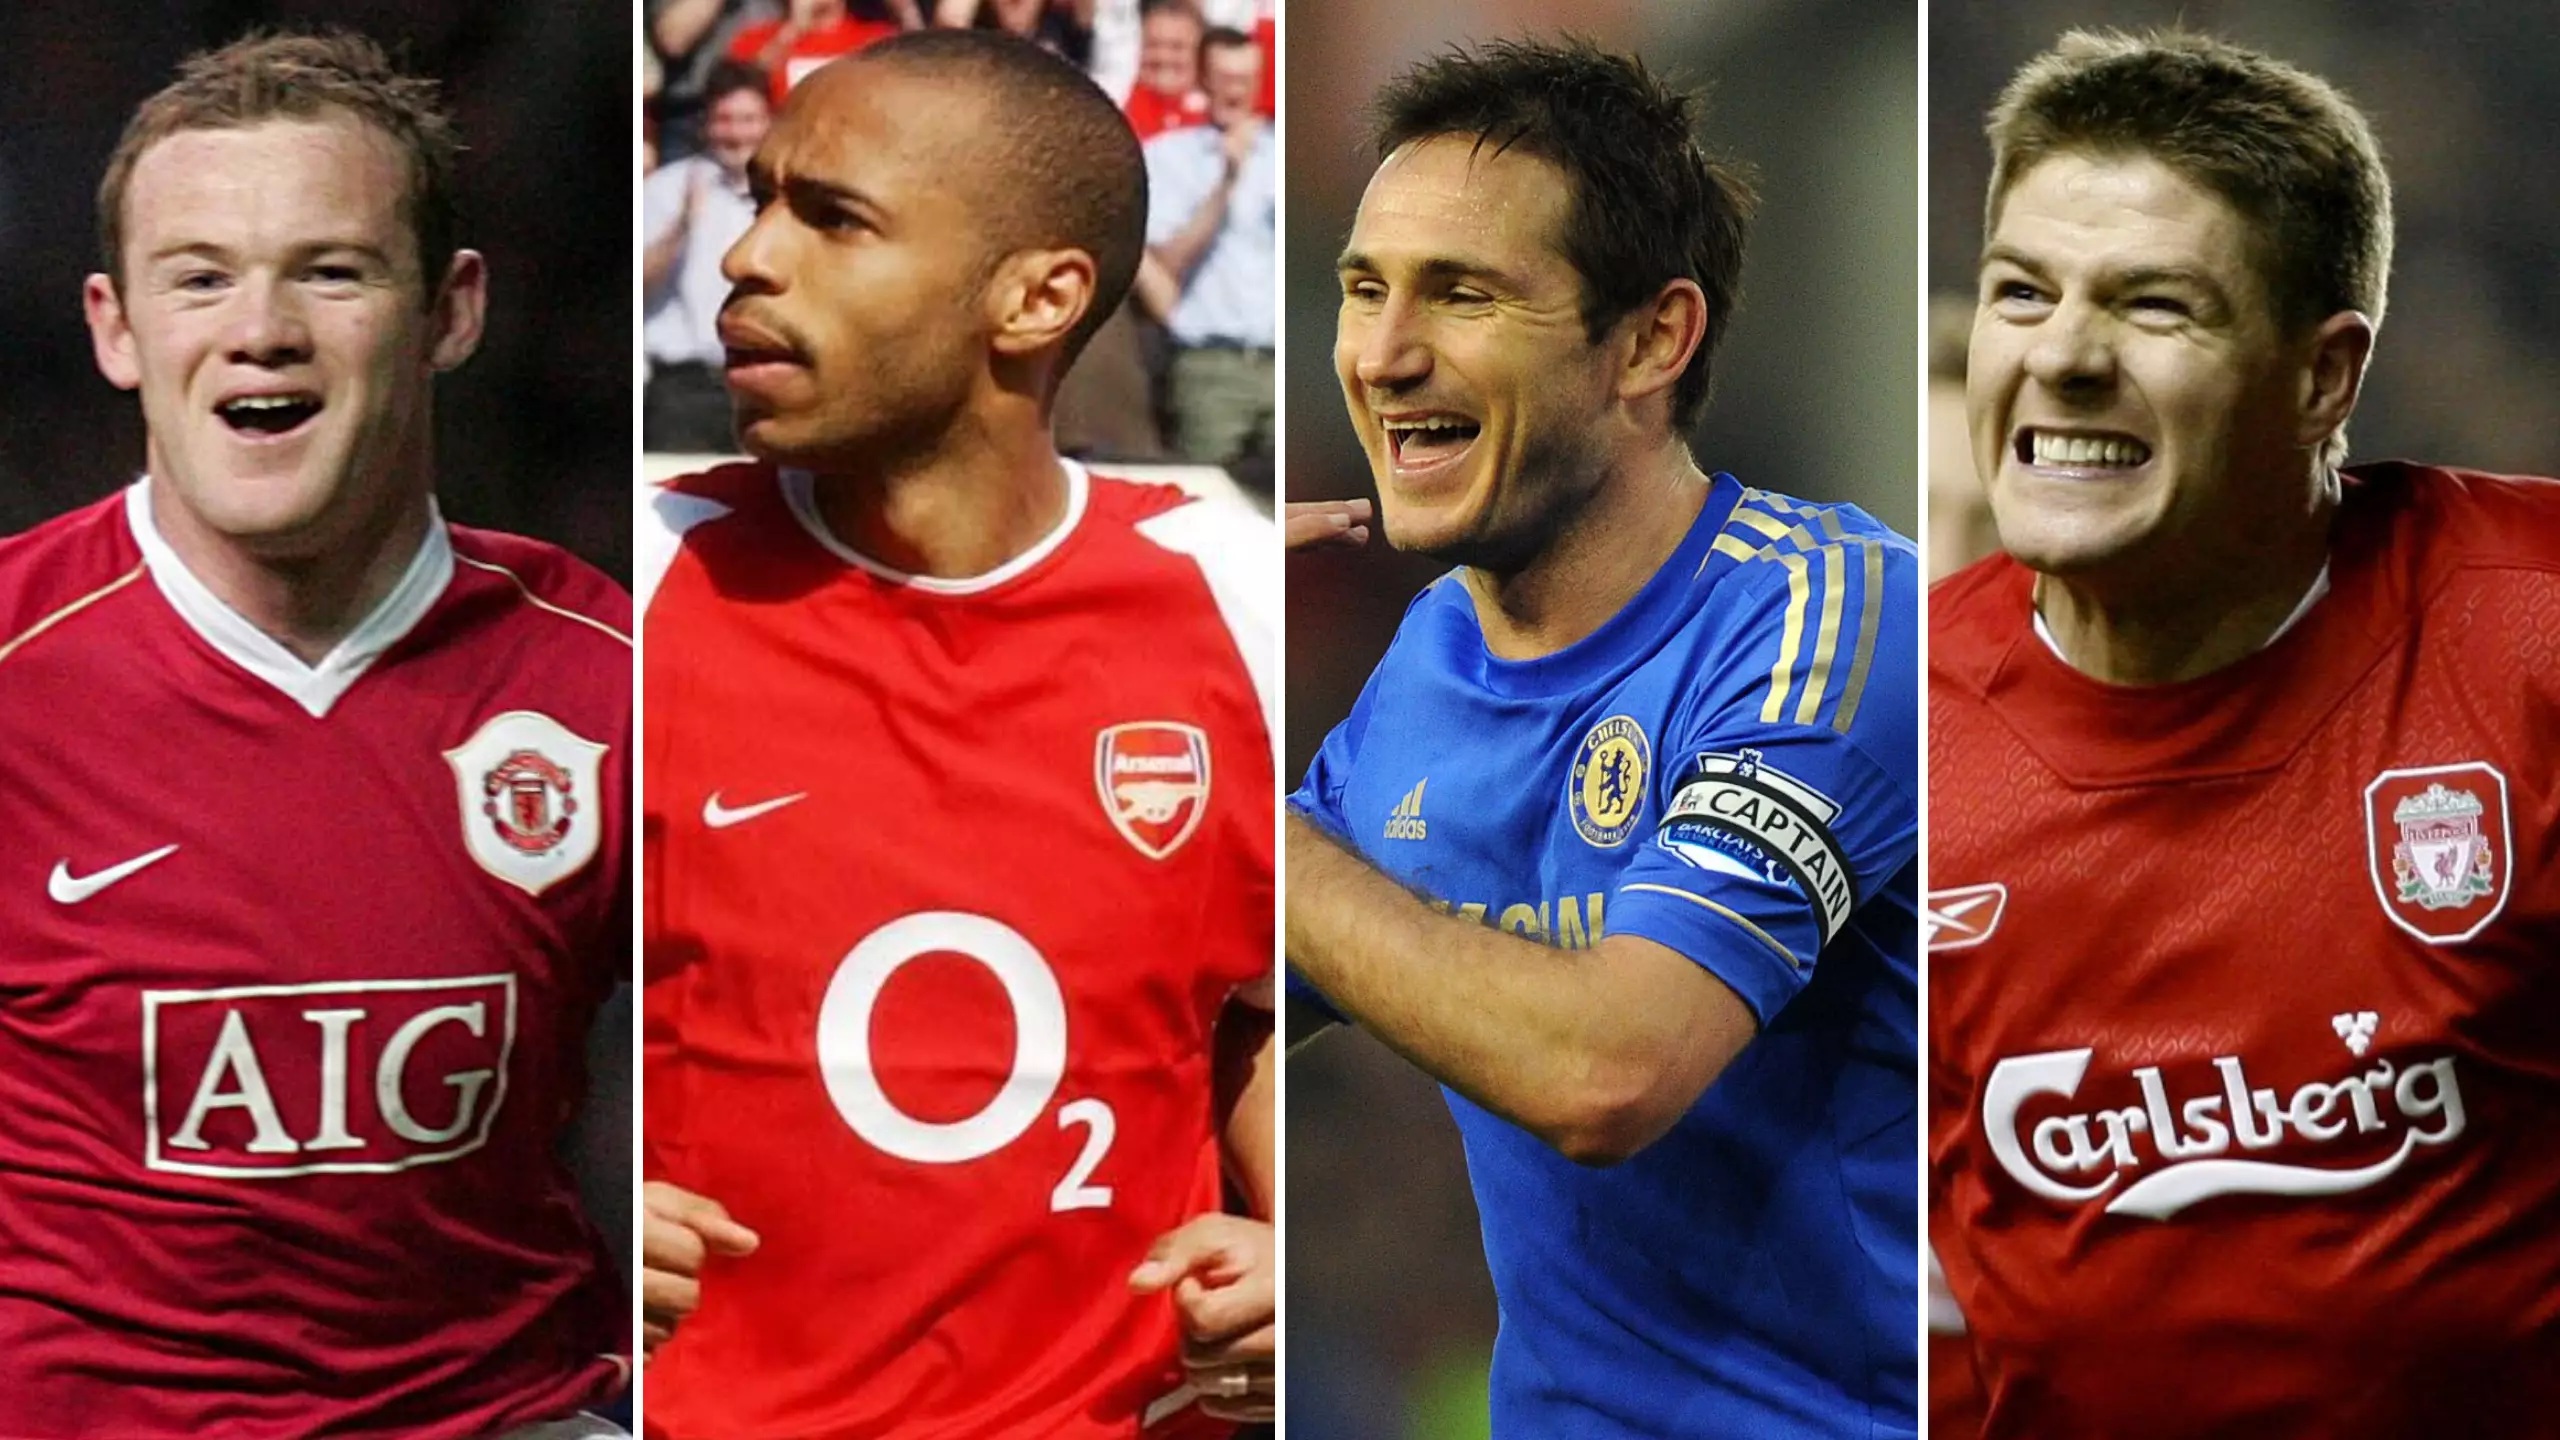 Fan Creates The Ultimate List Of Premier League Legends Ranked From 'GOAT' To 'Overrated'